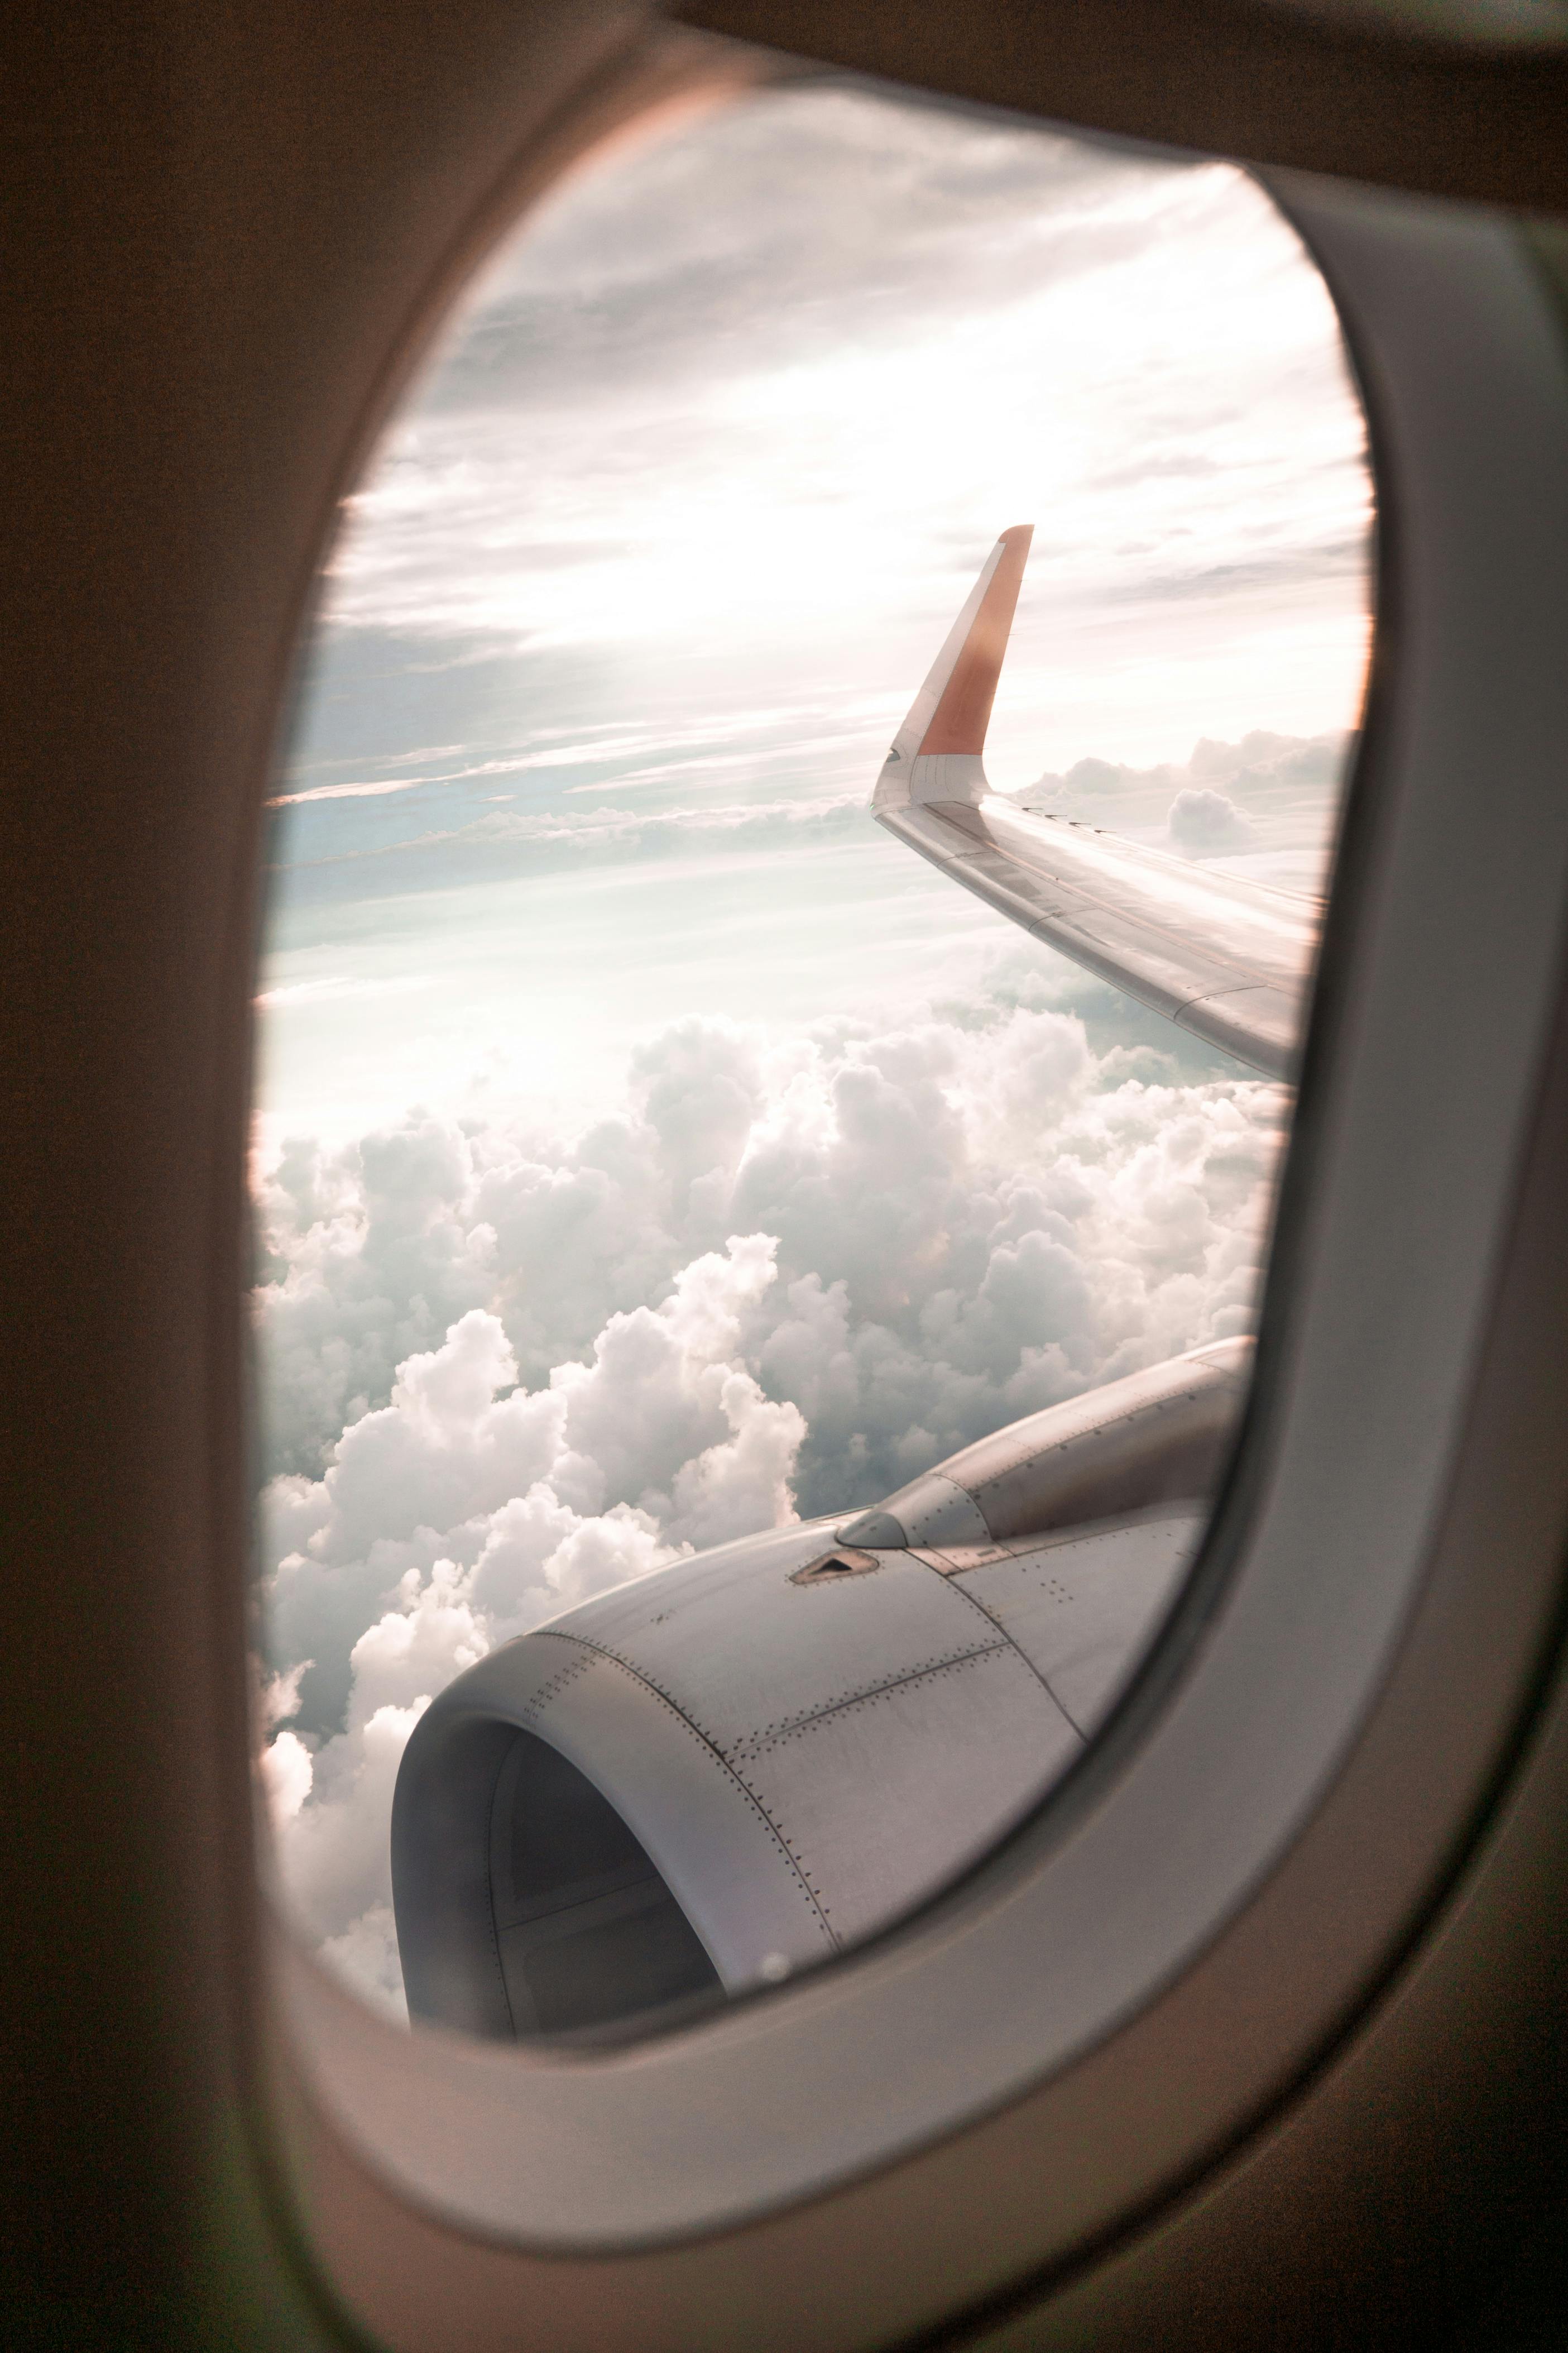 A view of clouds from an airplane window | Source: Pexels